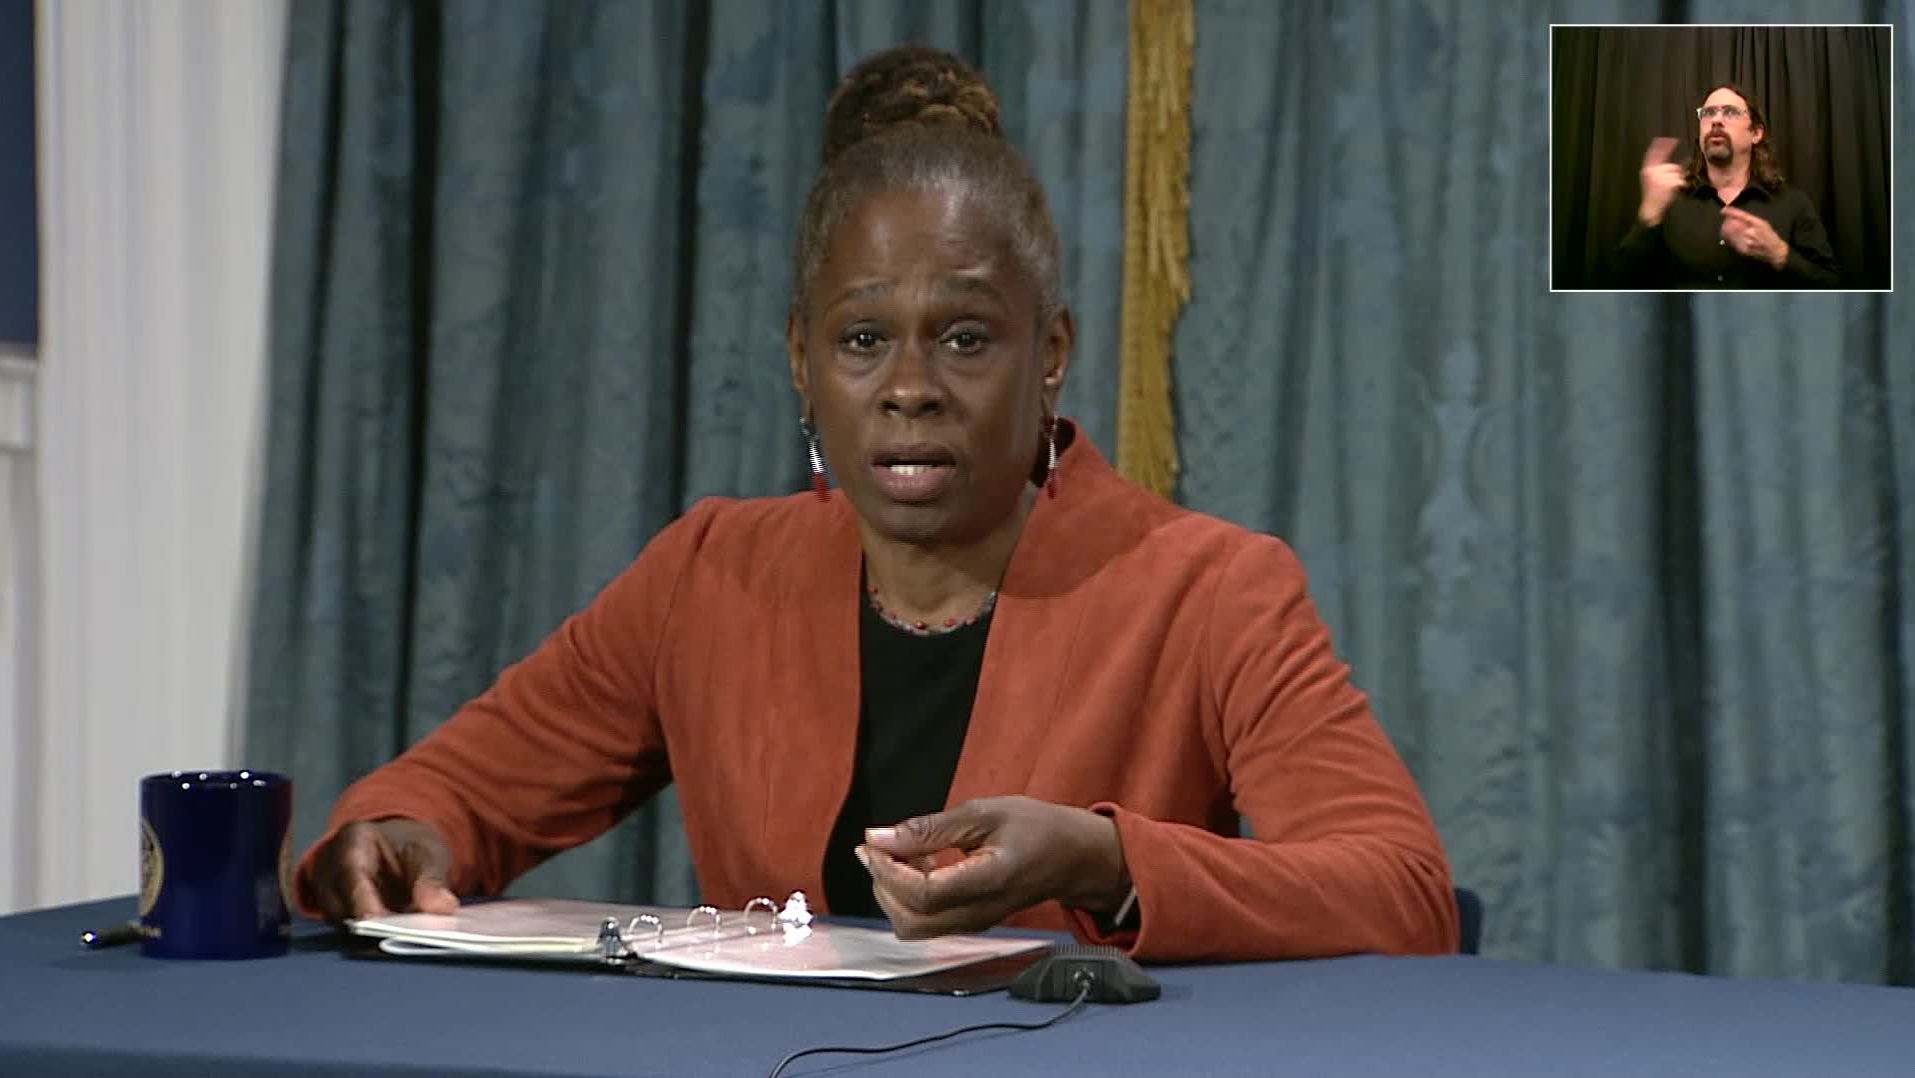 New York City first lady Chirlane McCray announces a pilot program to send mental health teams instead of police to respond to crisis calls.